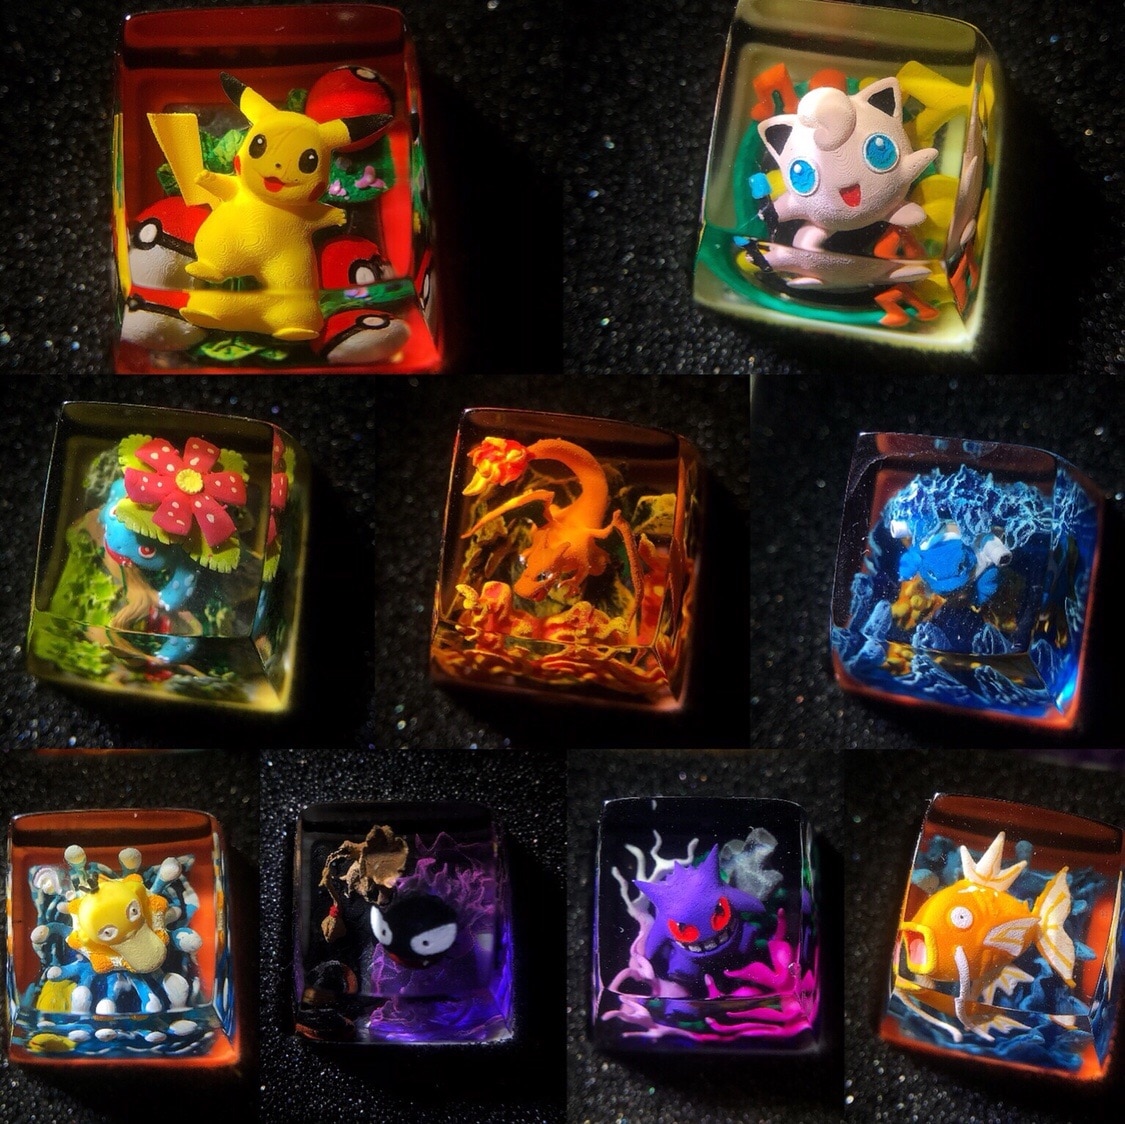 Genuine Pokemon Resin Keycaps Pikachu Charizard Eevee DIY Keycaps For Game Enthusiasts And Mechanical Keyboards Design